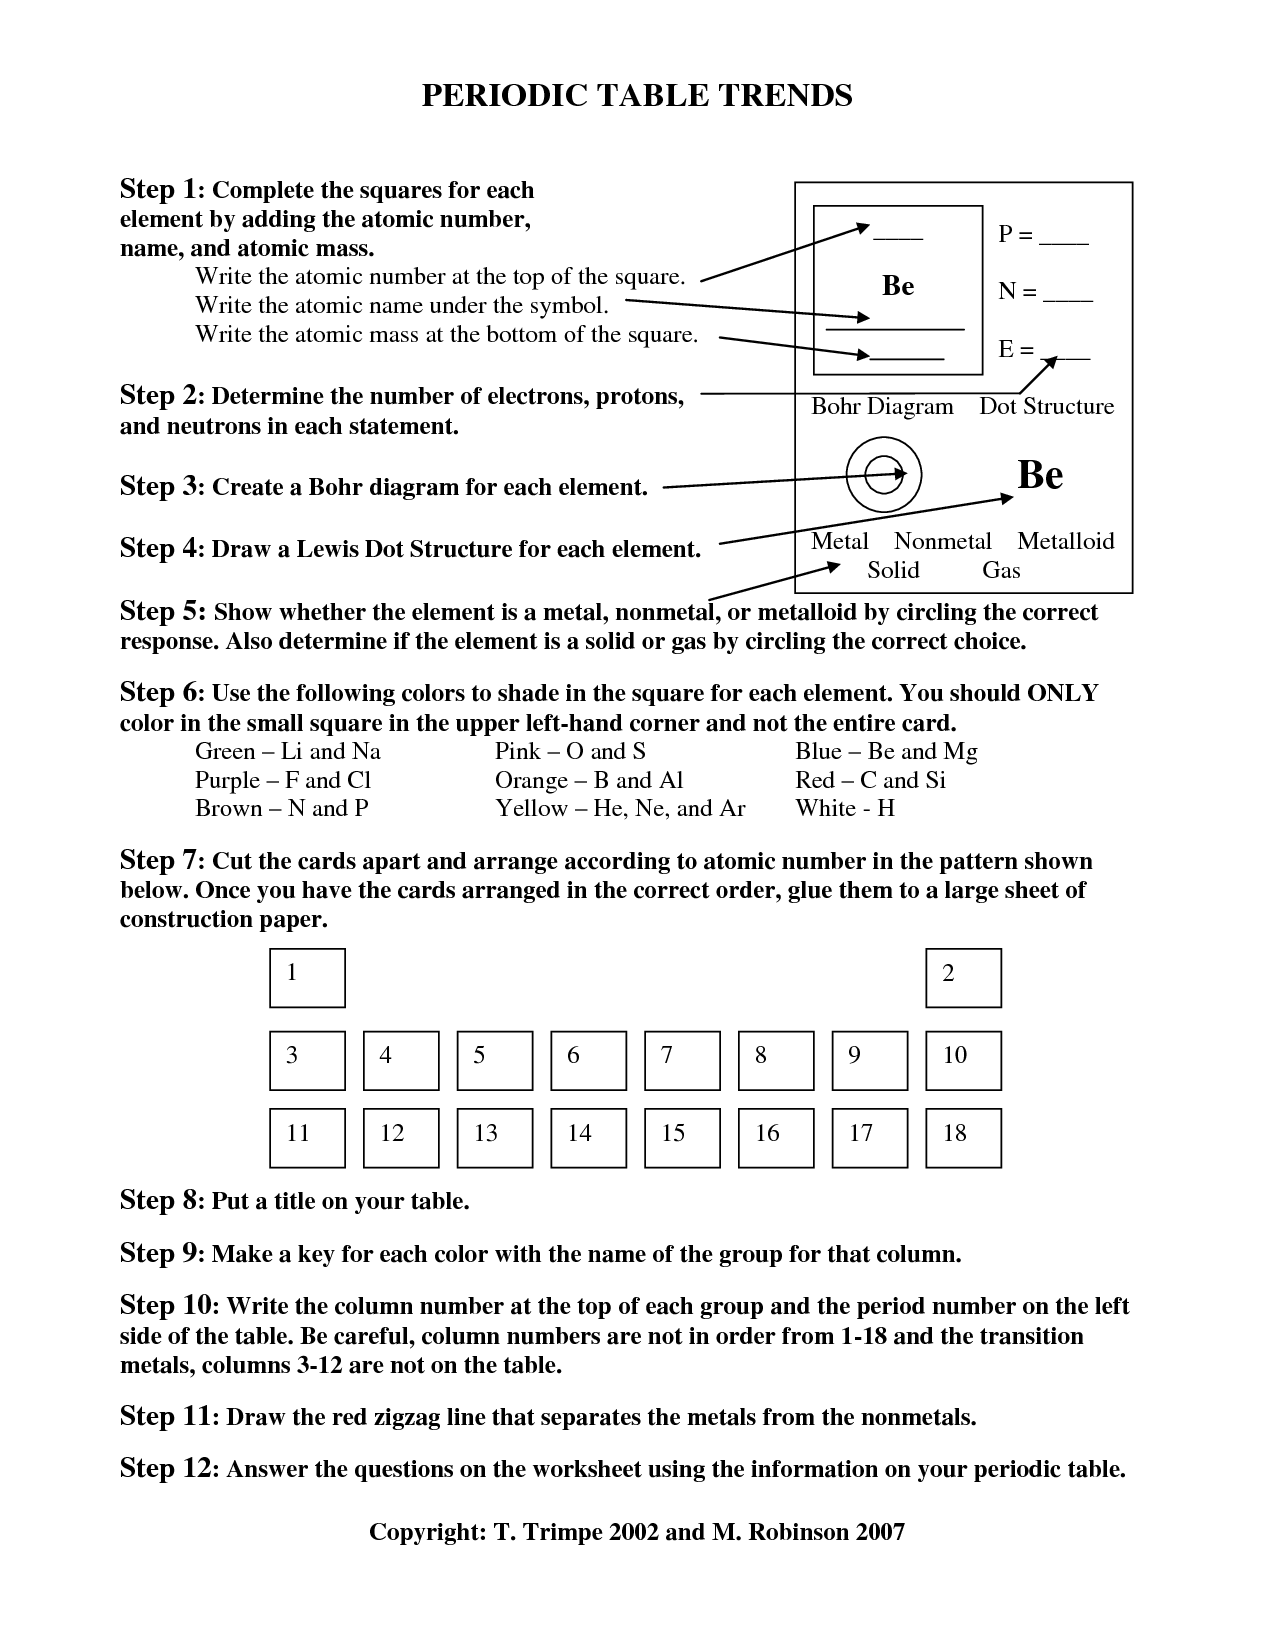 The Periodic Table Worksheet Answers